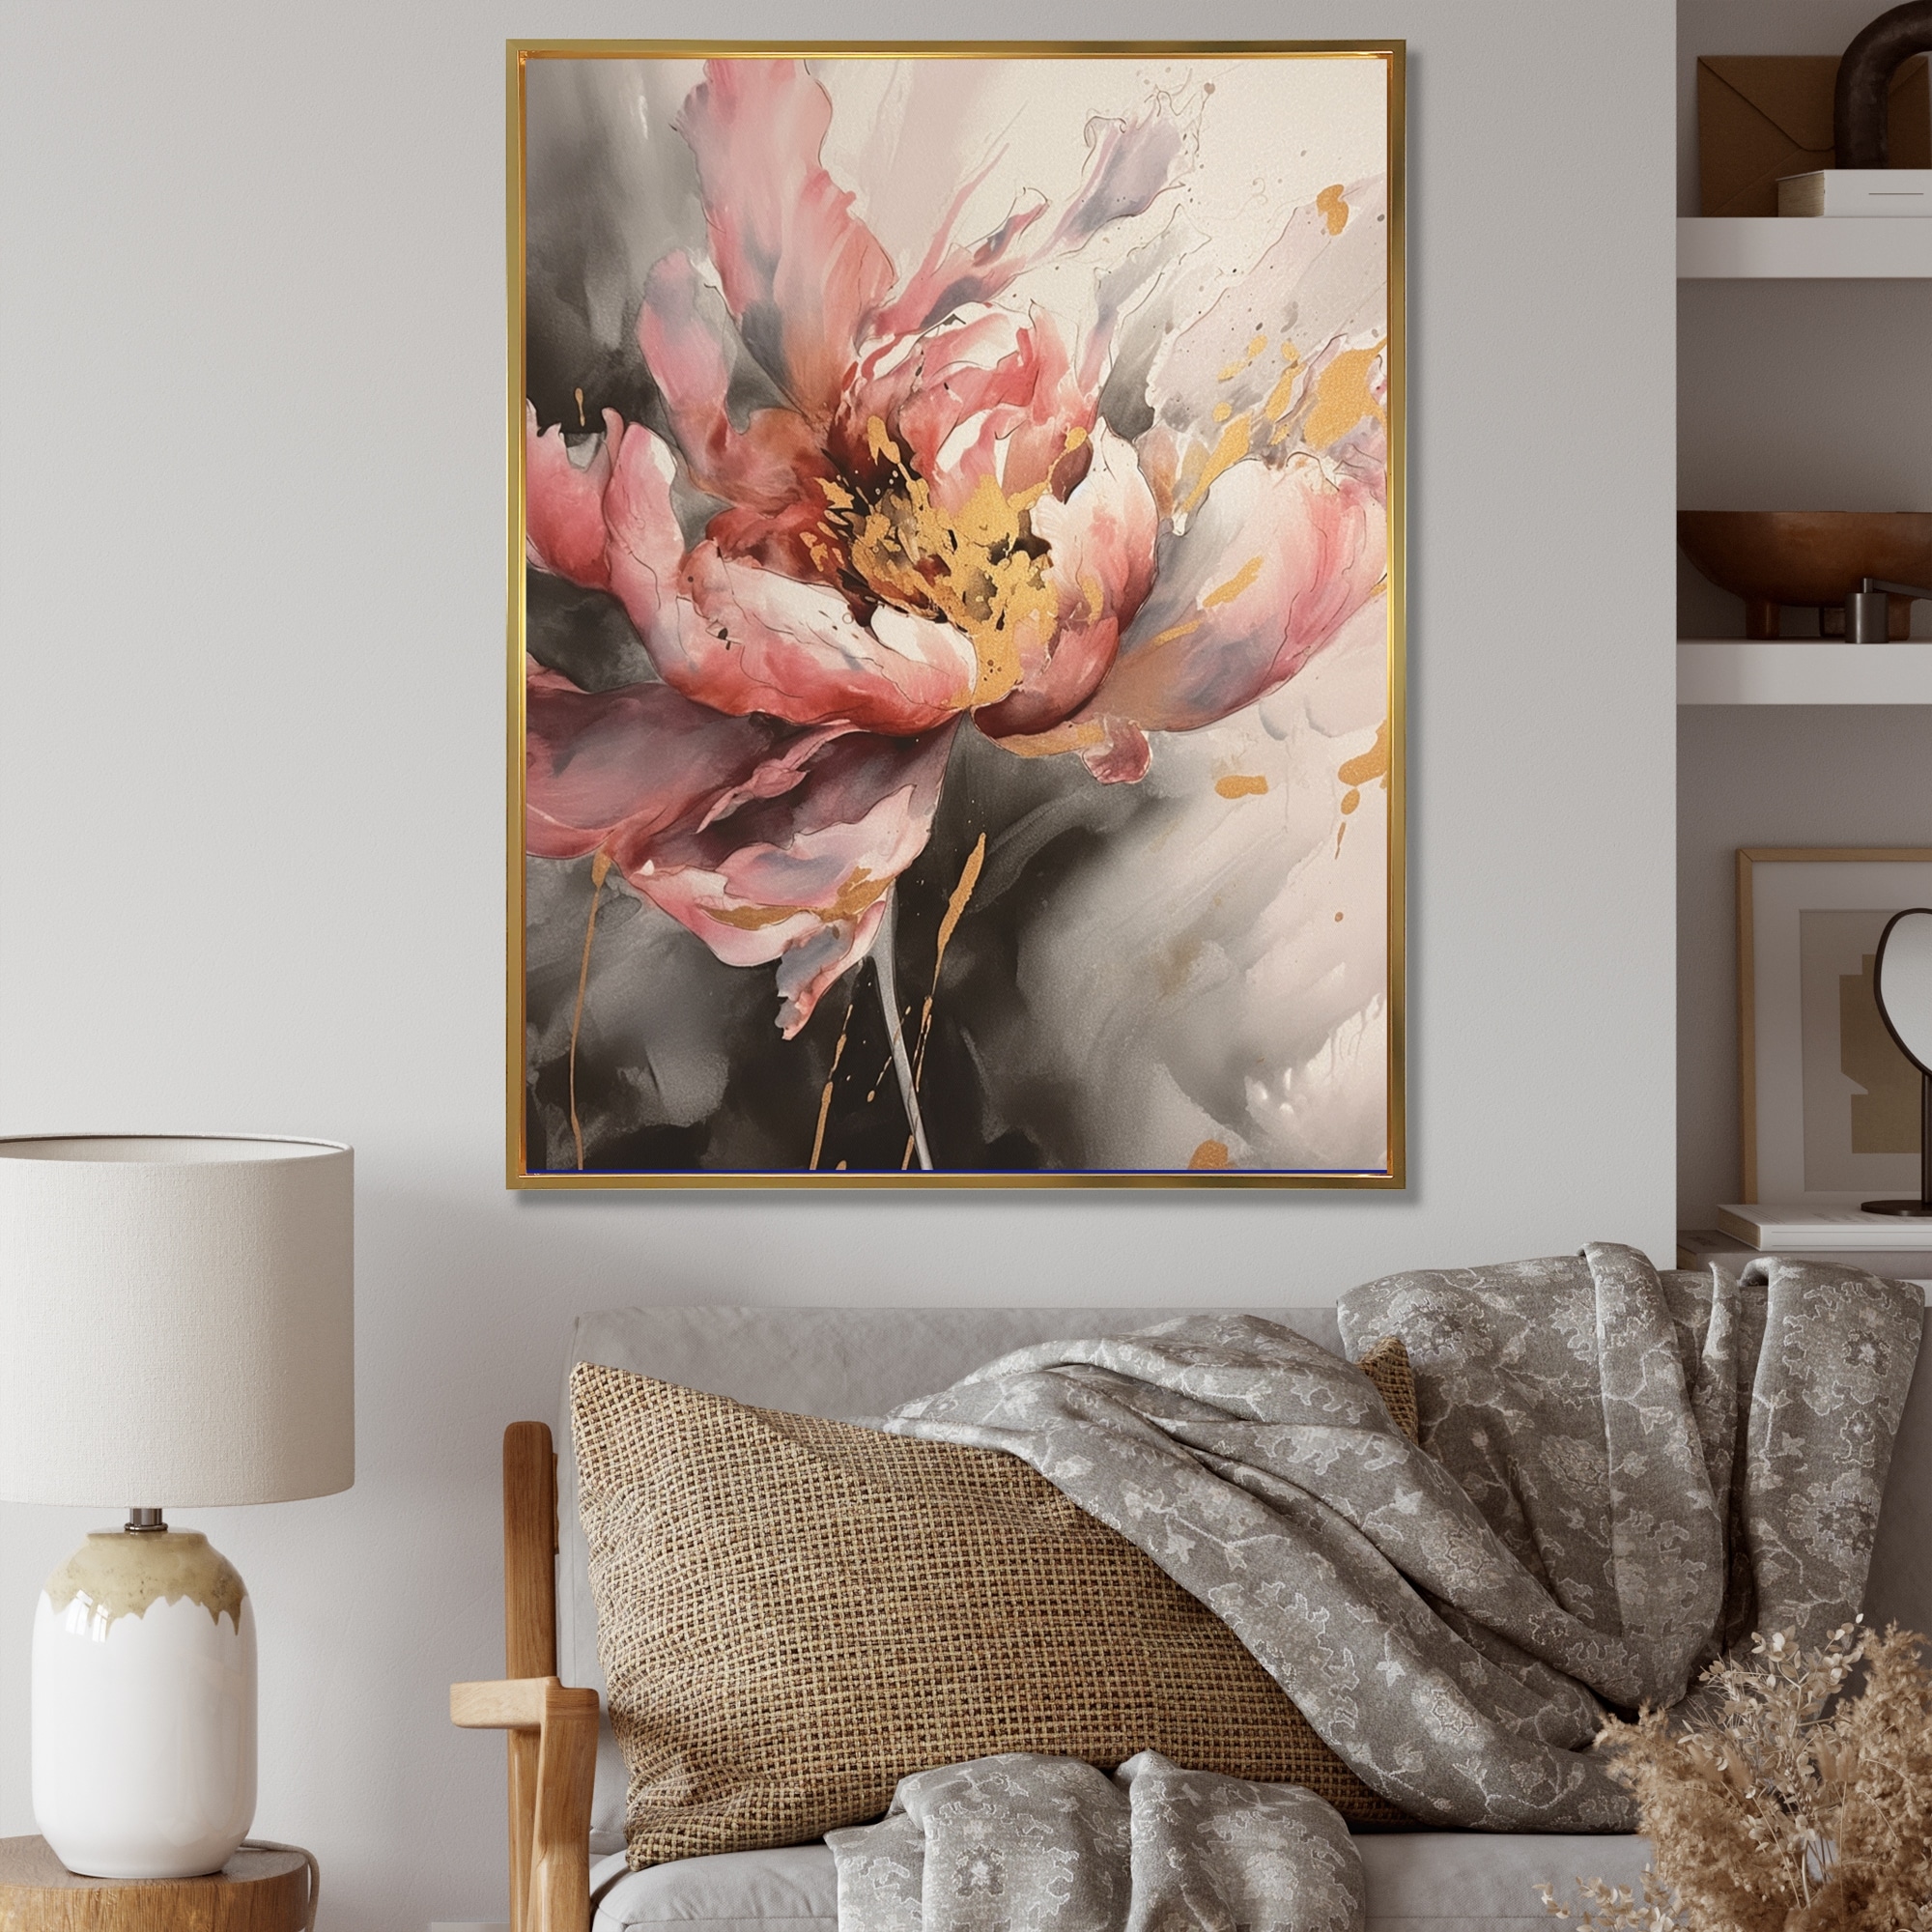 Pink Peony - Enchanted Floral Design